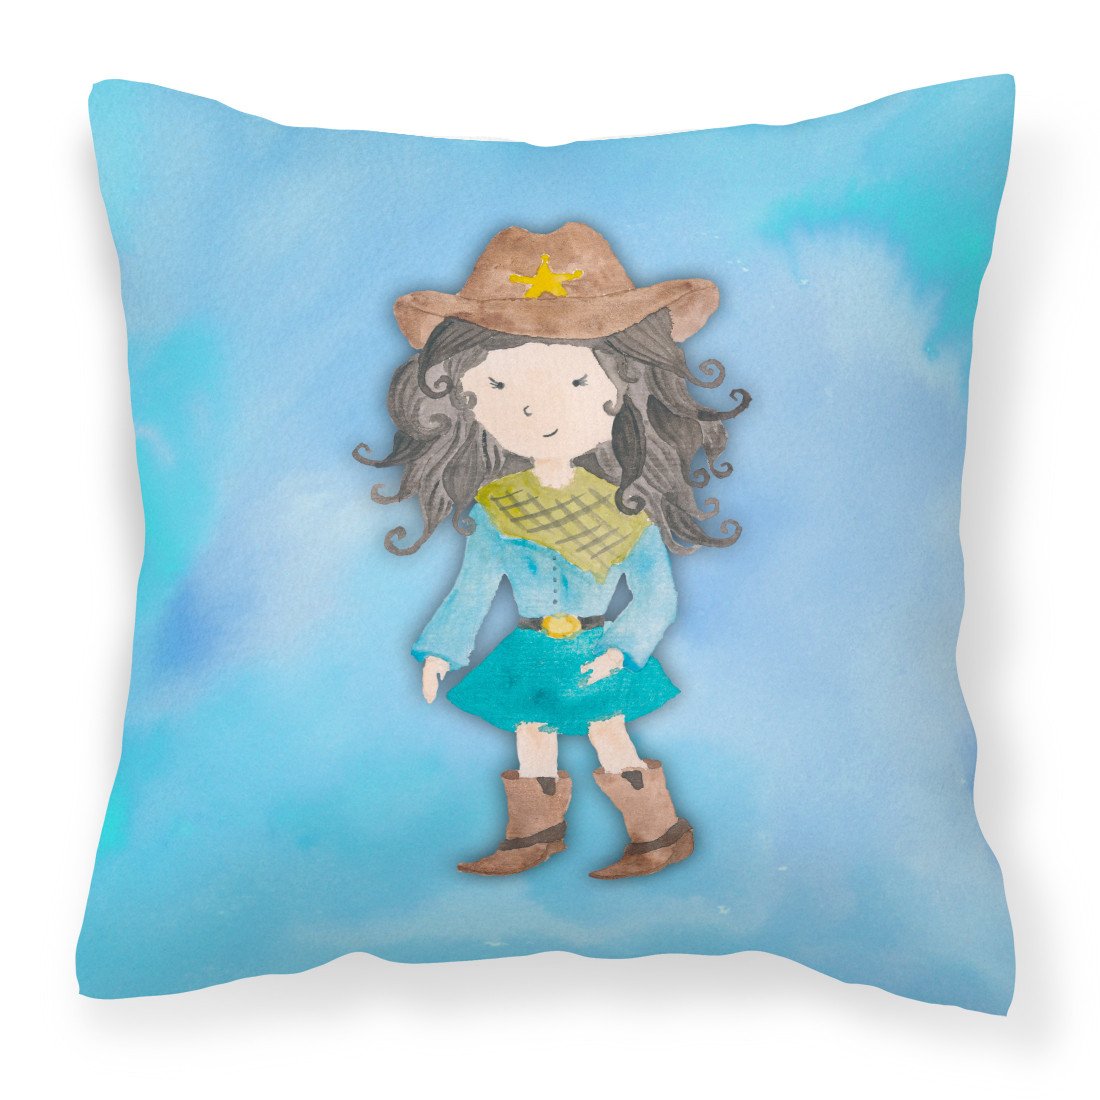 Cowgirl Watercolor Fabric Decorative Pillow BB7367PW1818 by Caroline's Treasures